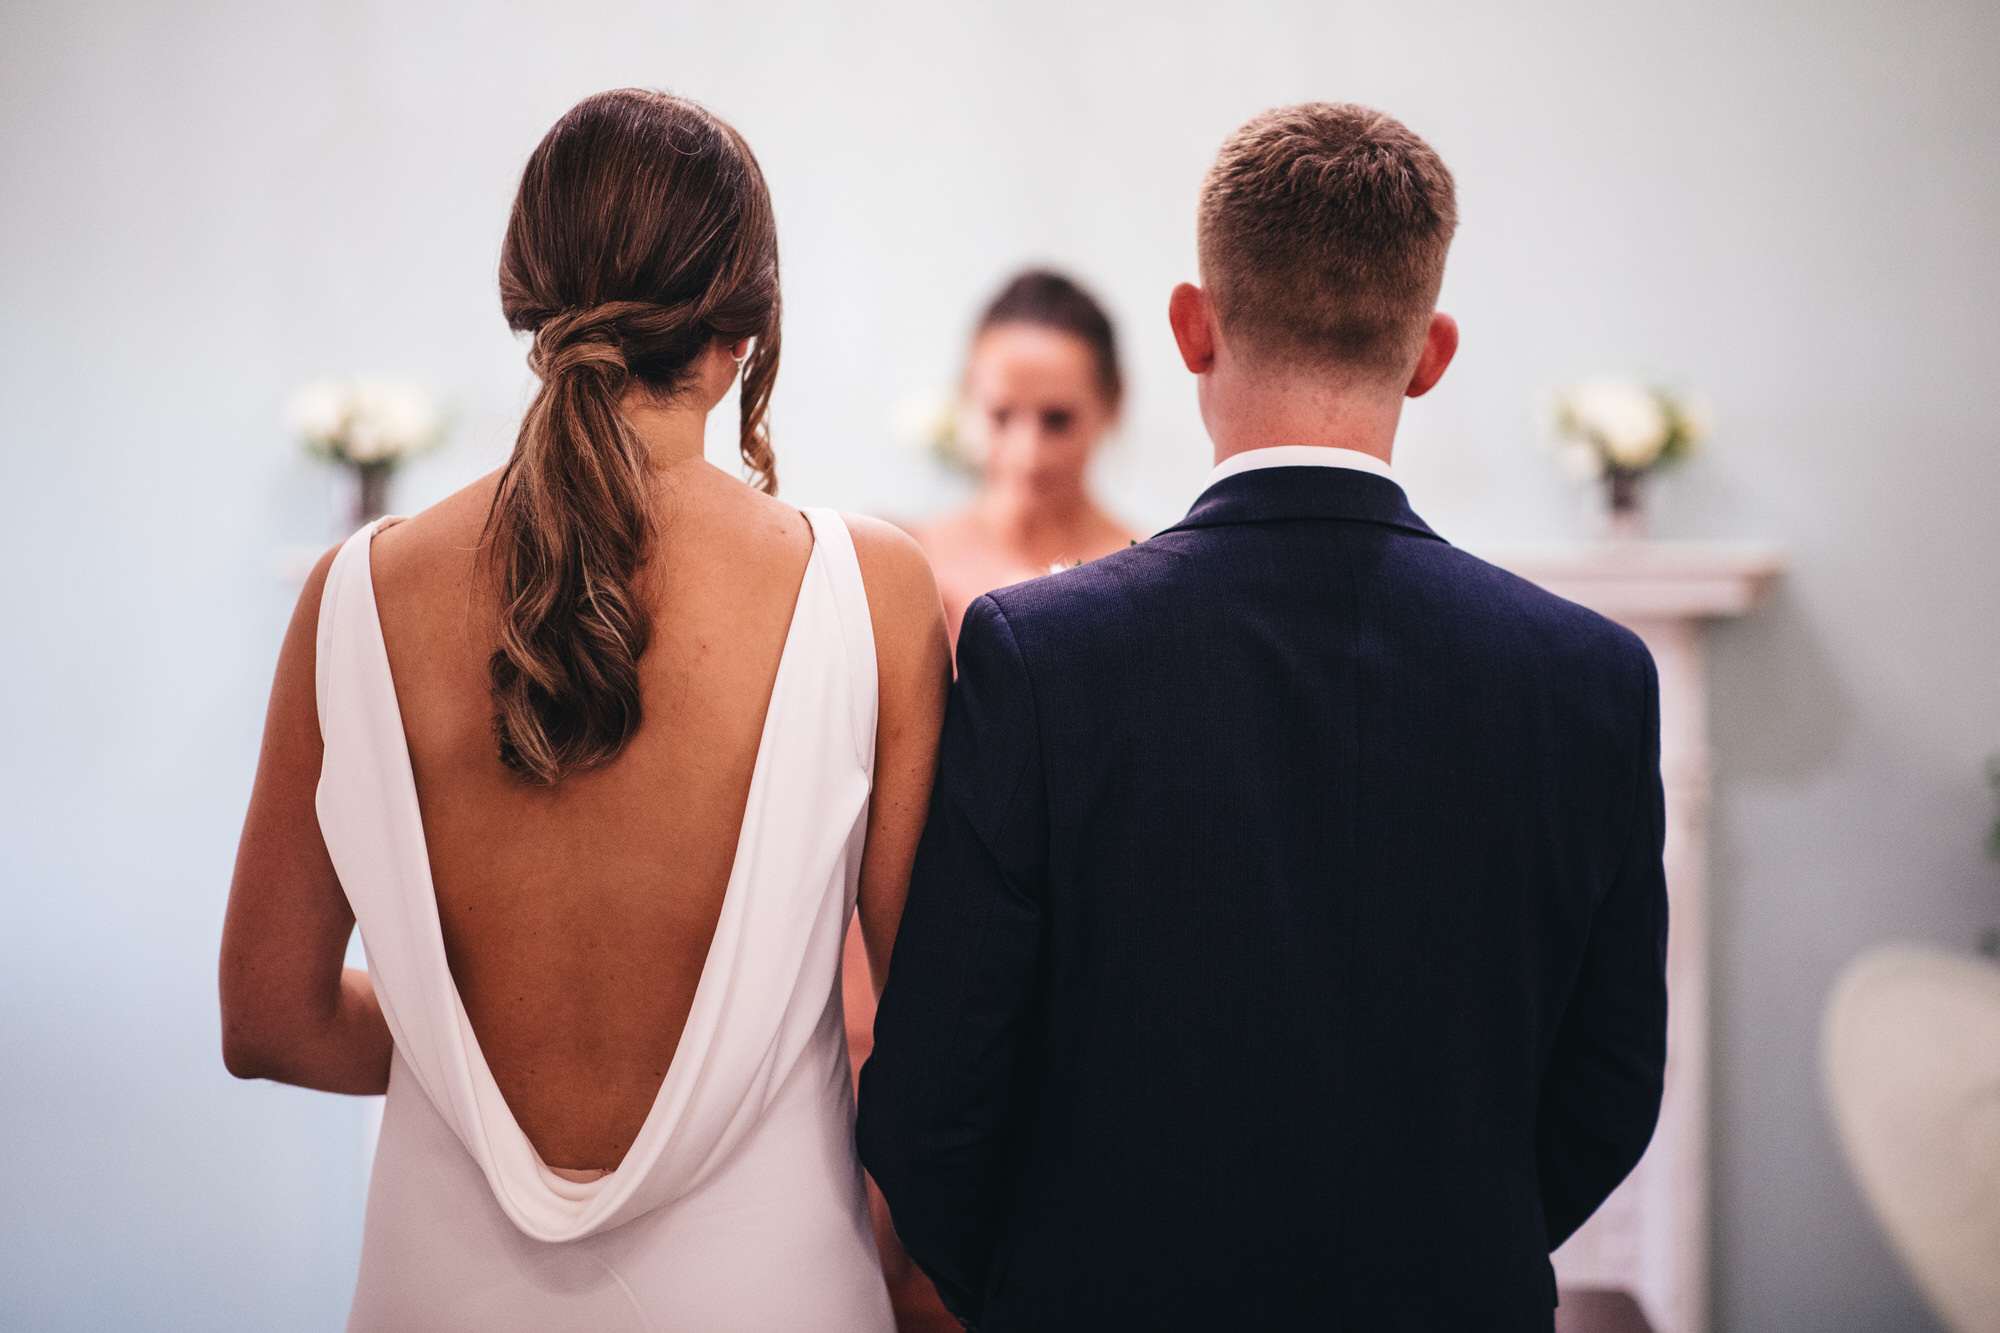 backless wedding dress, bride and groom at ceremony